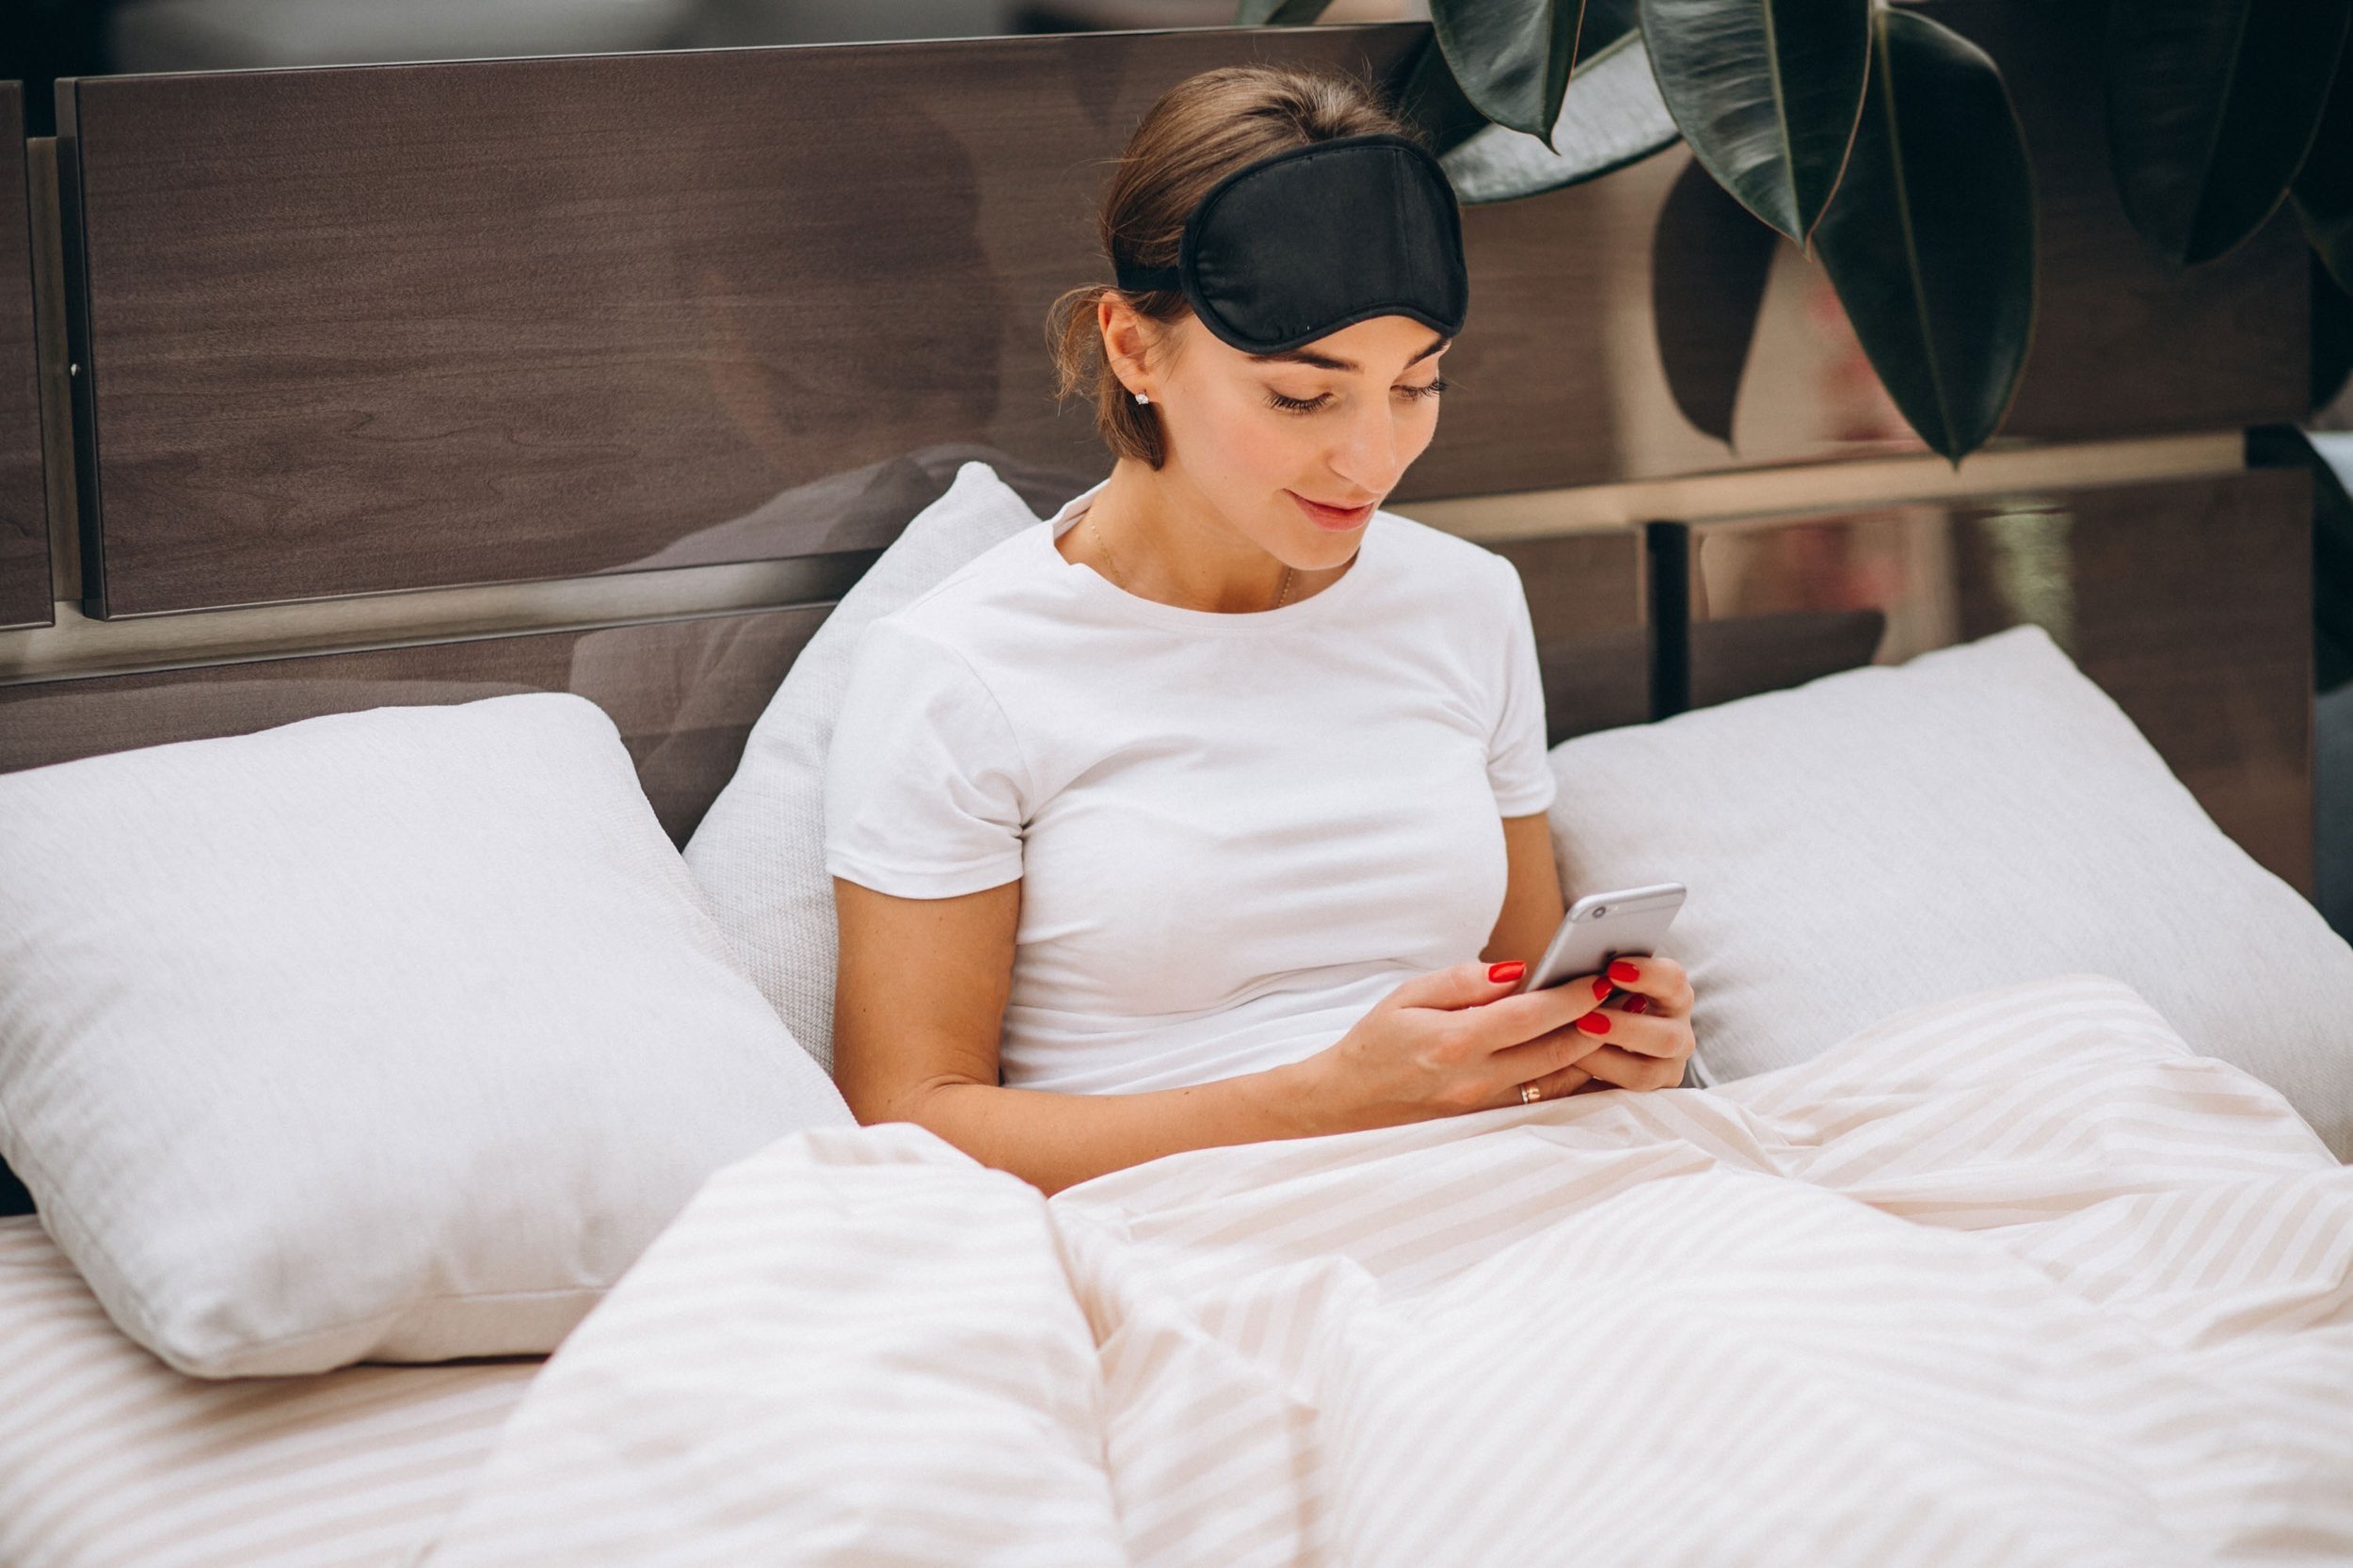  A woman with a sleep mask on her forehead, engrossed in her phone in bed. 